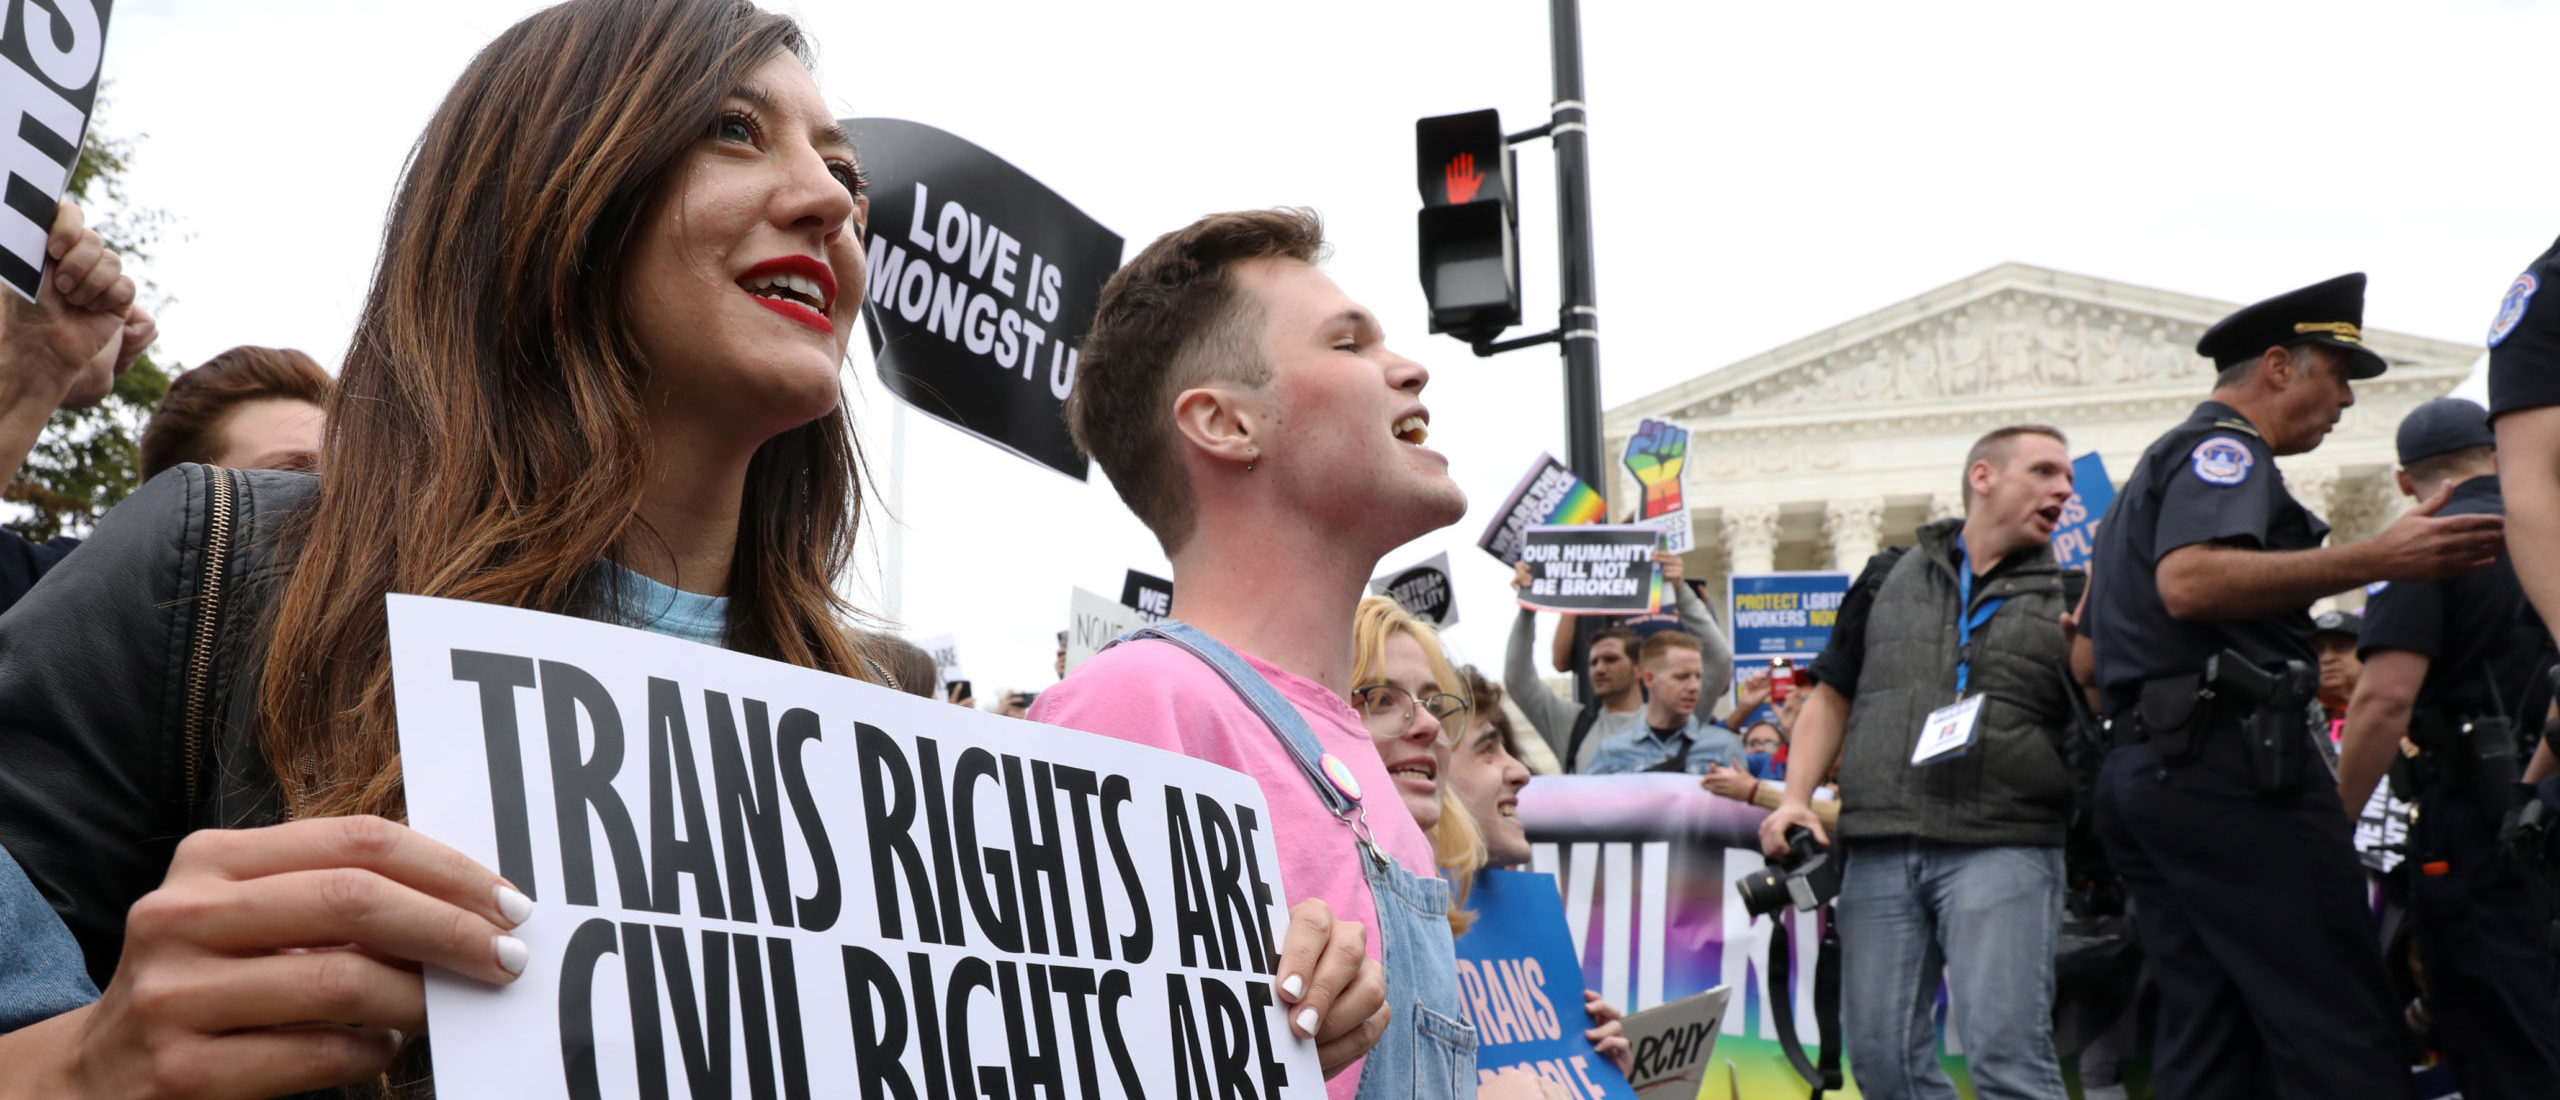 LGBTQ activists and supporters block the street outside the U.S. Supreme Court as it hears arguments in a major LGBT rights case on whether a federal anti-discrimination law that prohibits workplace discrimination on the basis of sex covers gay and transgender employees in Washington, U.S. October 8, 2019. REUTERS/Jonathan Ernst